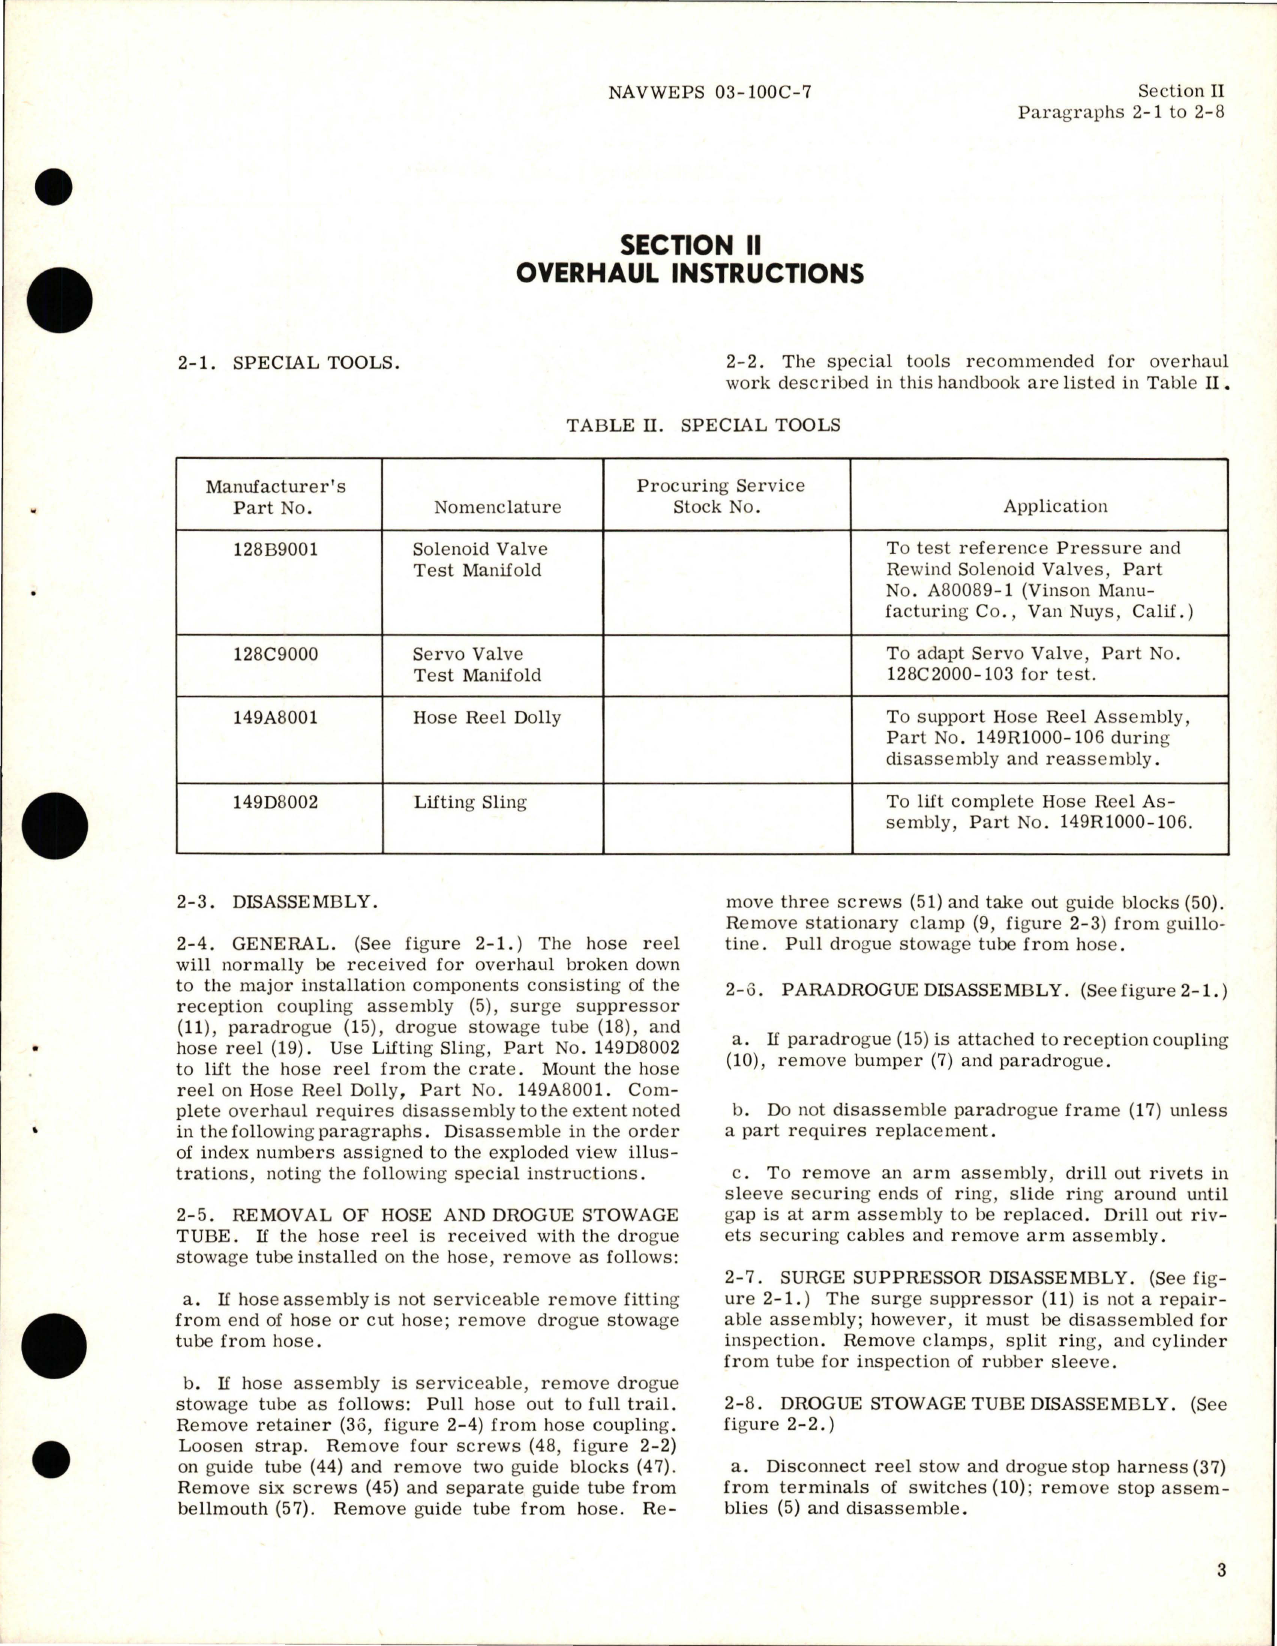 Sample page 7 from AirCorps Library document: Overhaul Instructions for Hose Reel Installation - Model FR300B - Part 149R1001-107